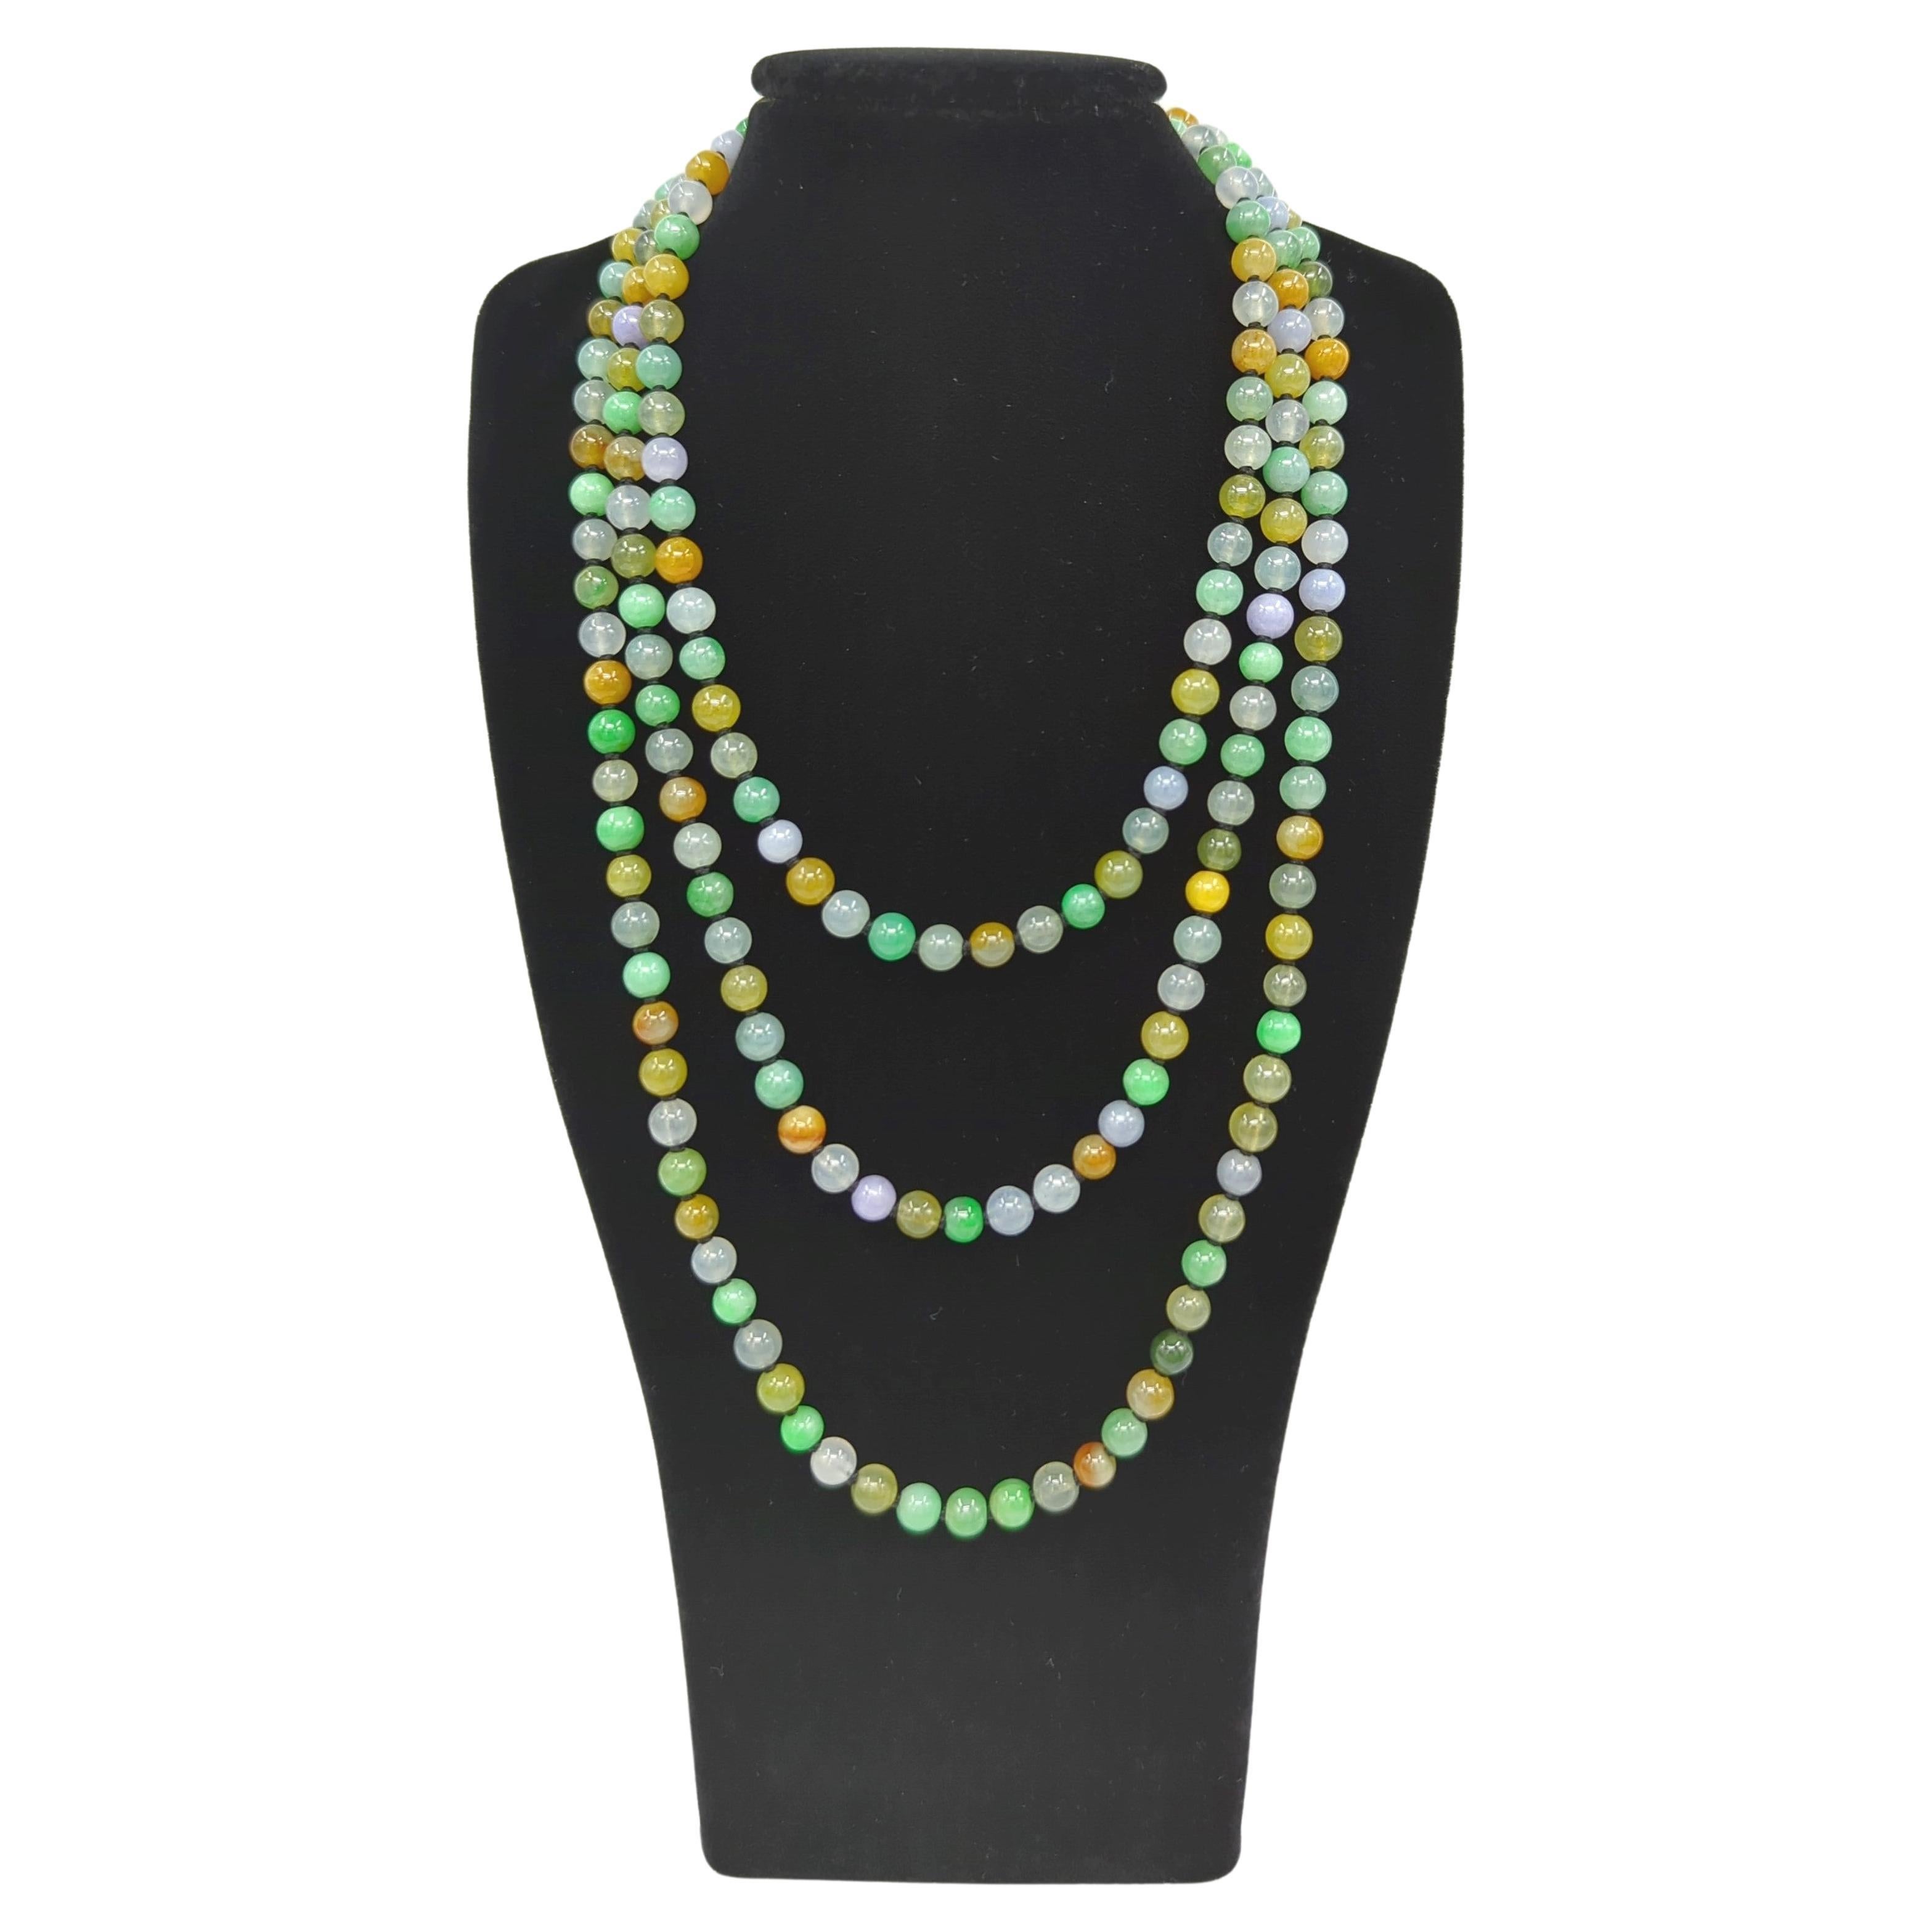 This exquisite necklace features a generous 52